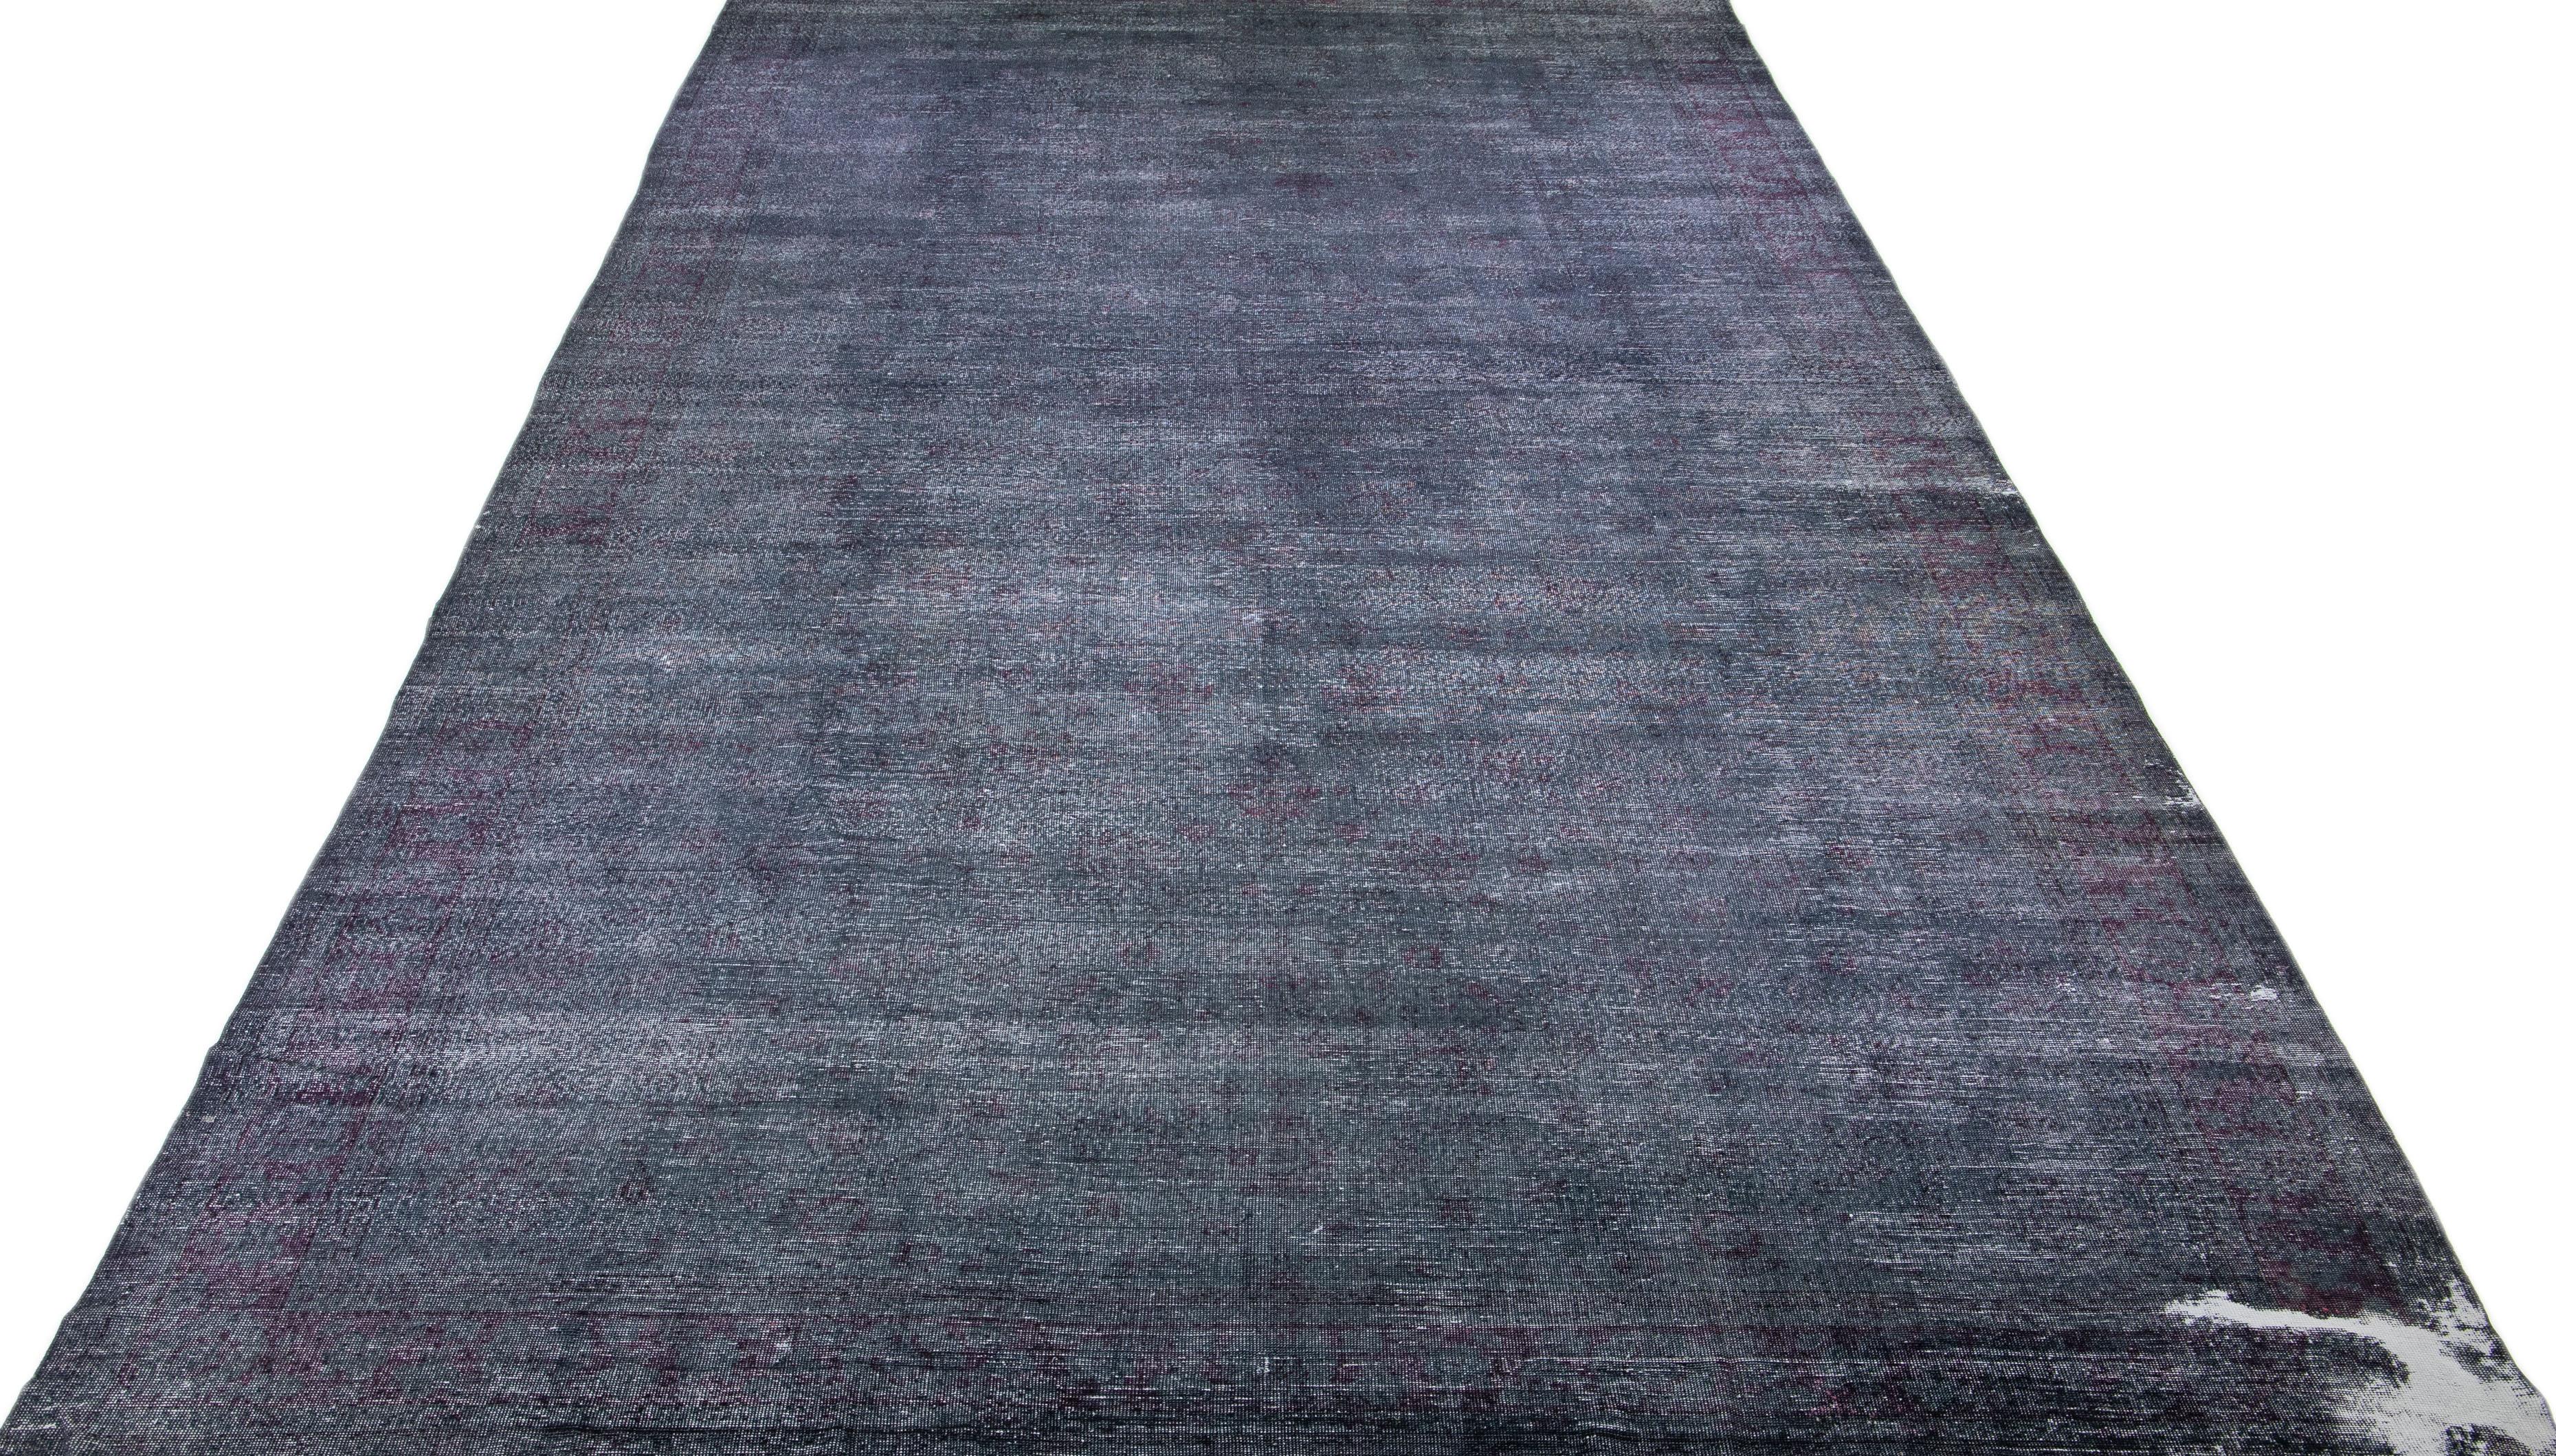 Beautiful Vintage Overdyed hand-knotted wool rug with a gray field. This Turkish rug has pink accents in an all-over floral design.

This rug measures: 12' x 25'11